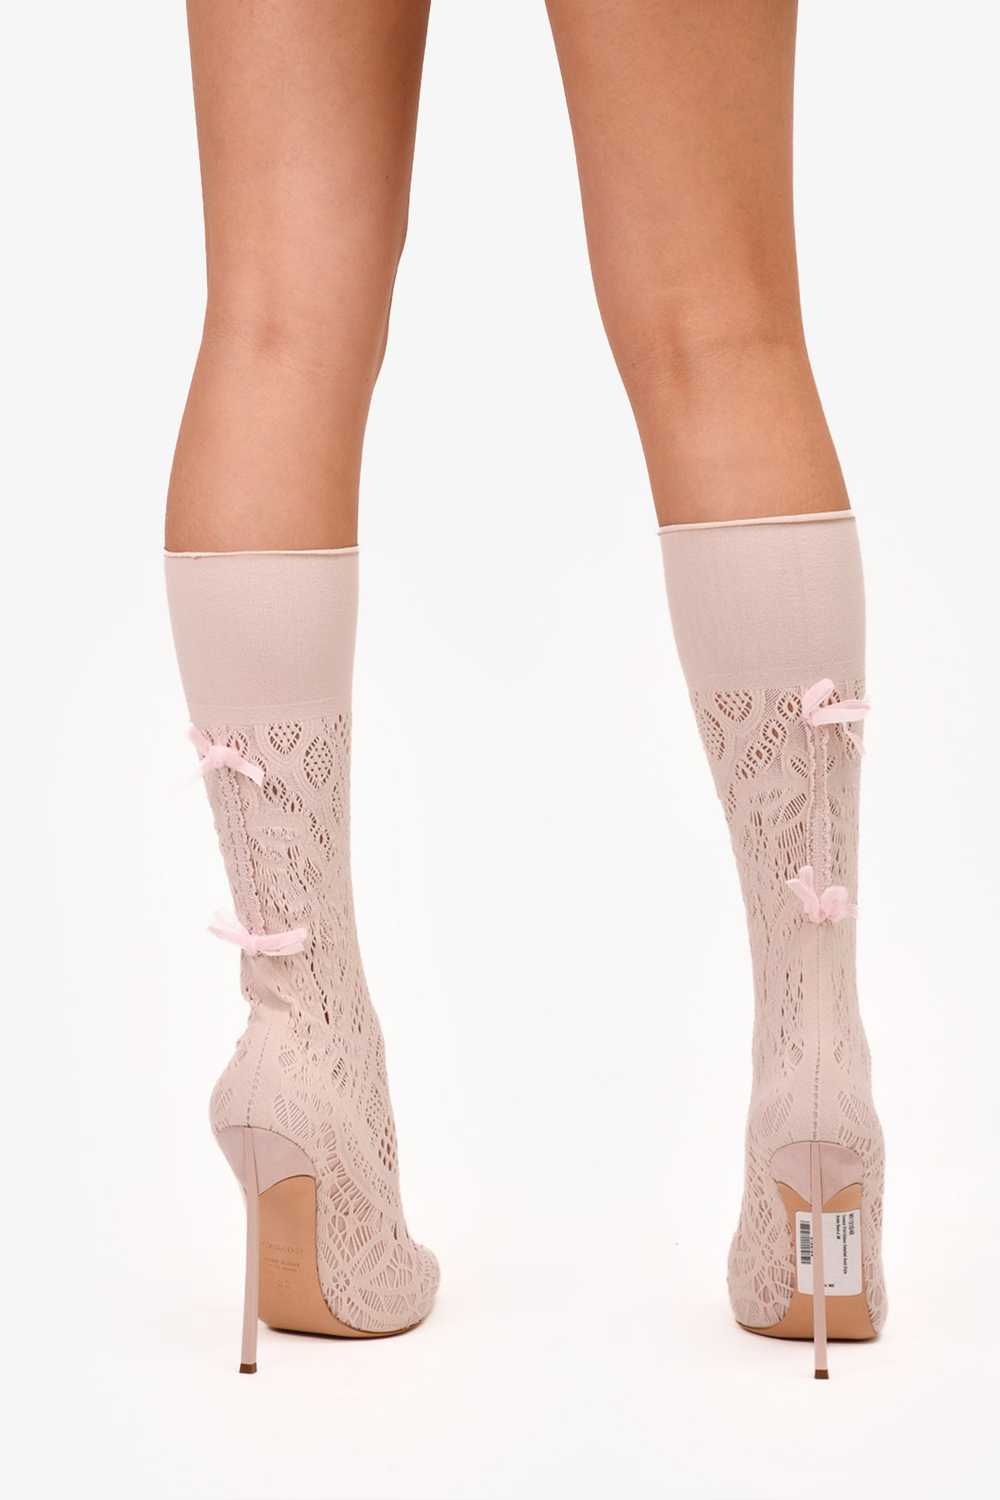 Casadei Pink Ribbon Detailed Sock Style Ankle Boo… - image 5